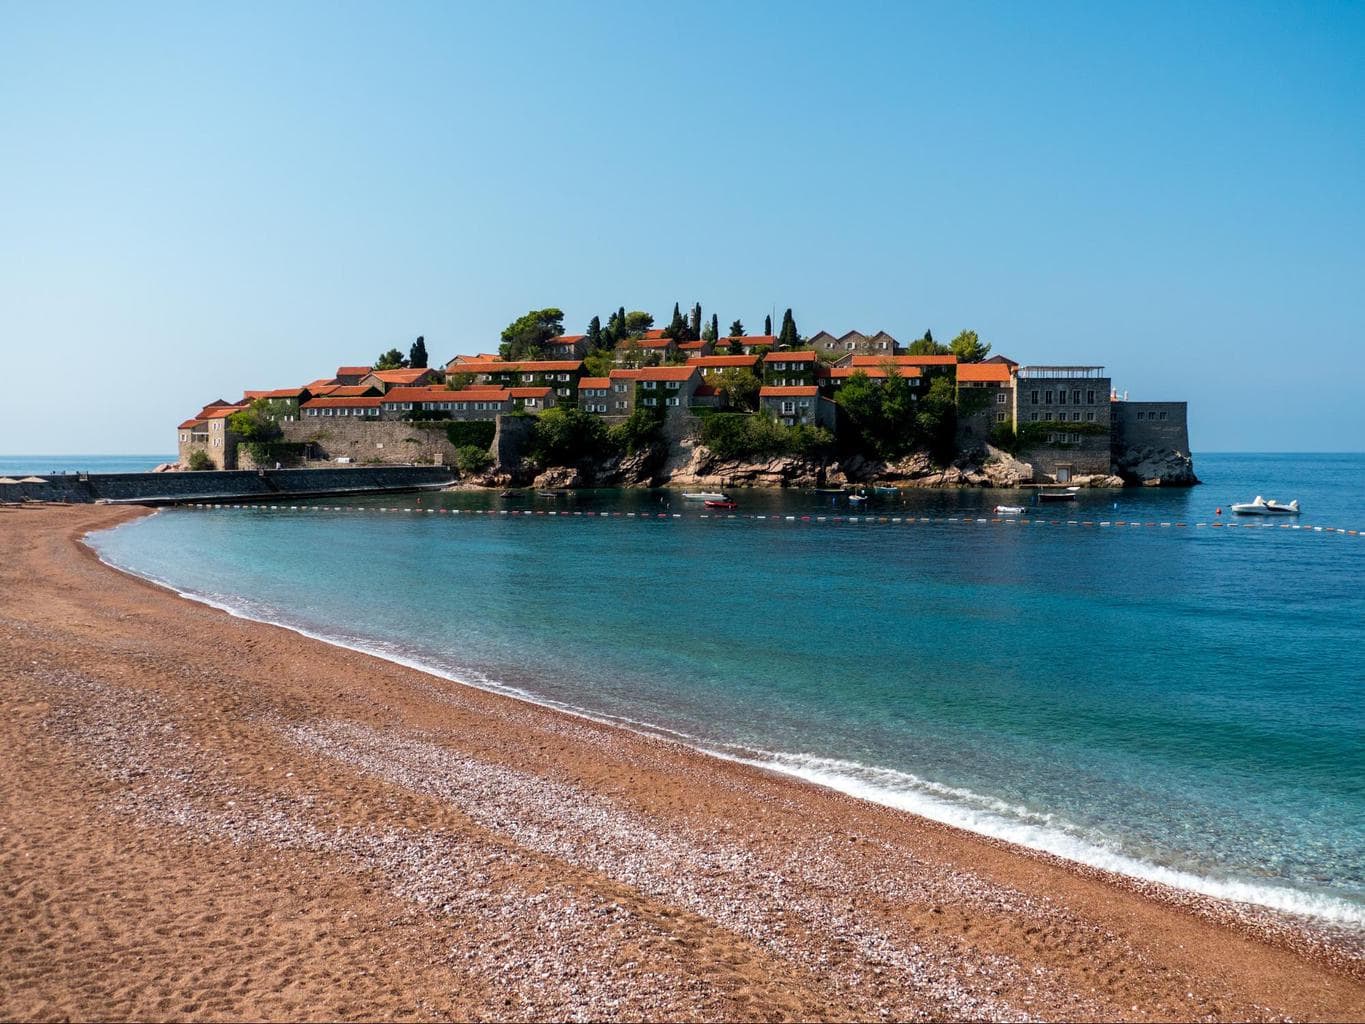 Sveti Stefan beach right in front of the island